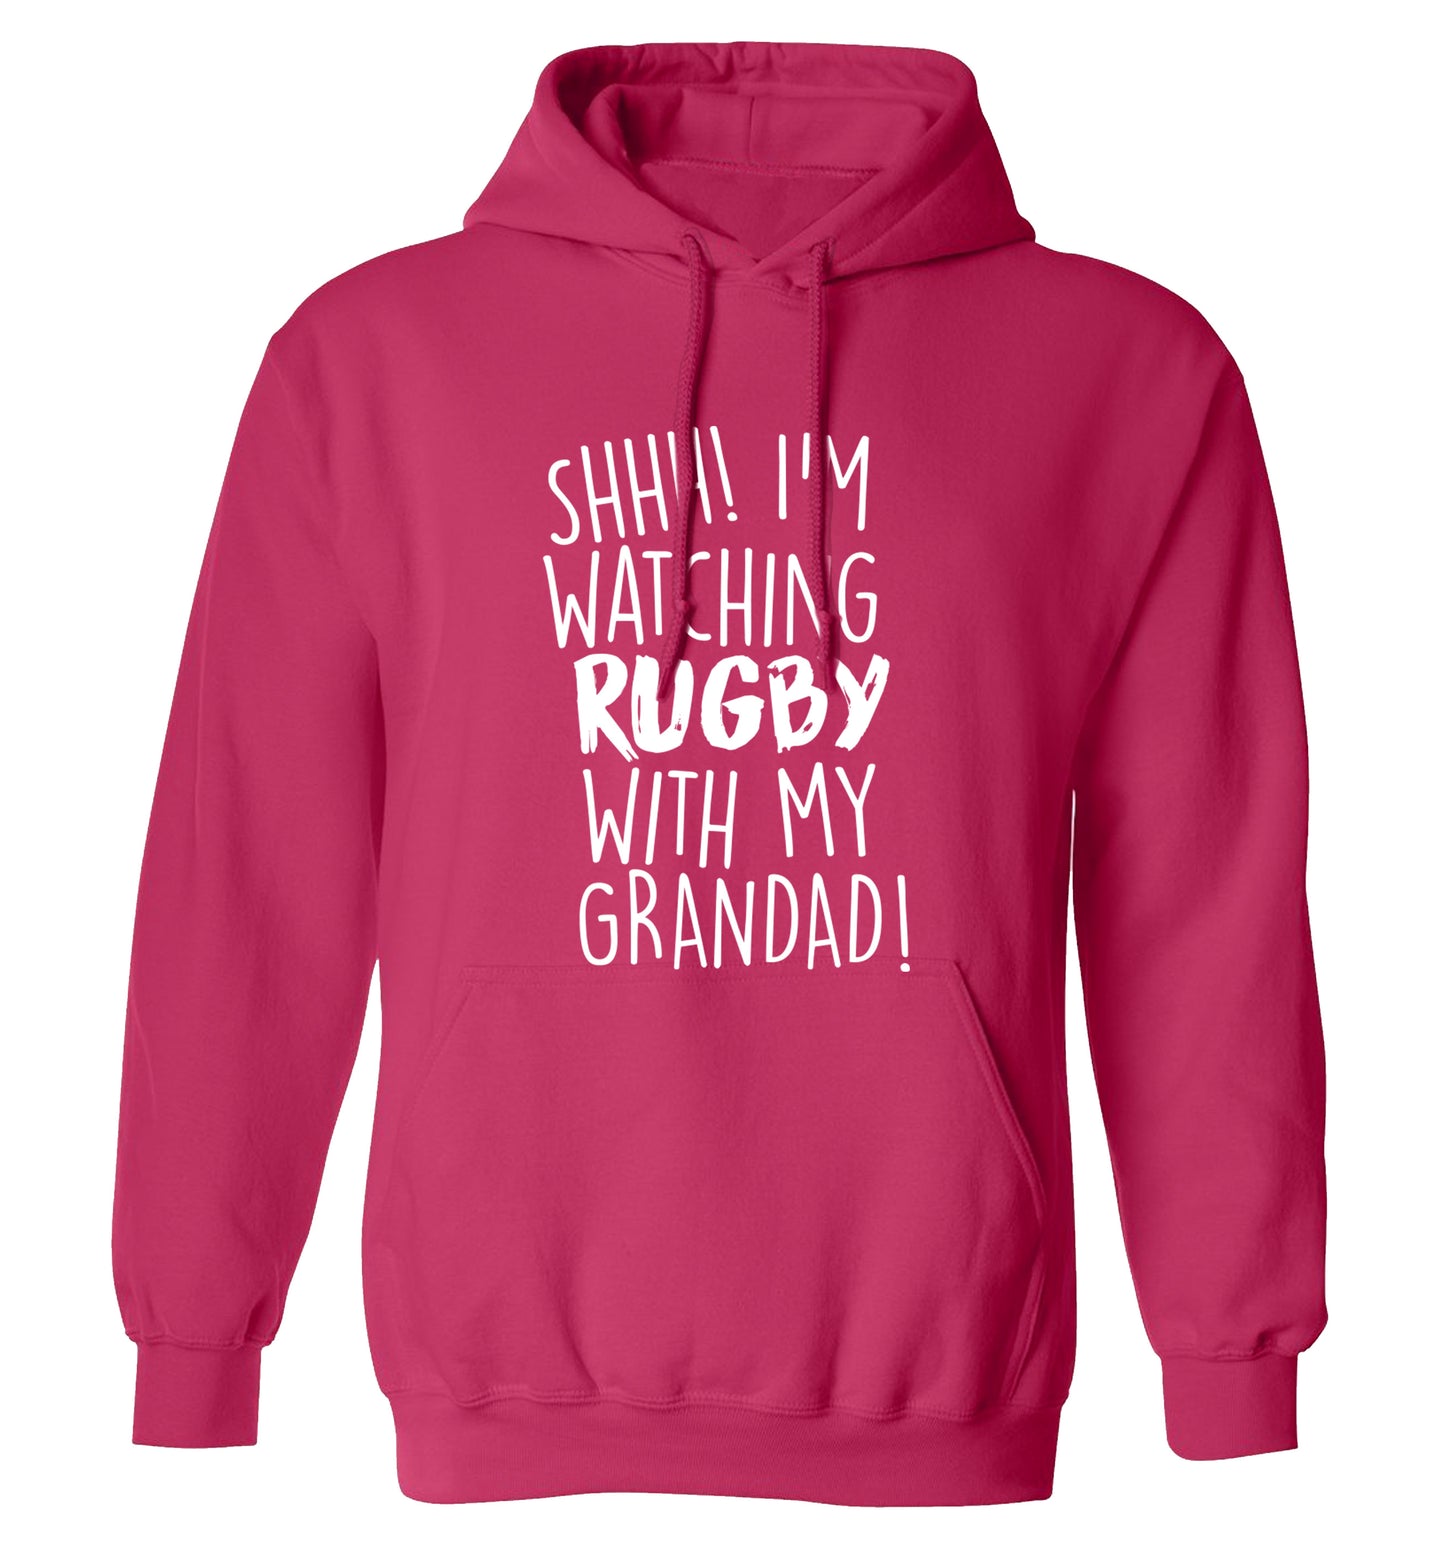 Shh I'm watching rugby with my grandad adults unisex pink hoodie 2XL